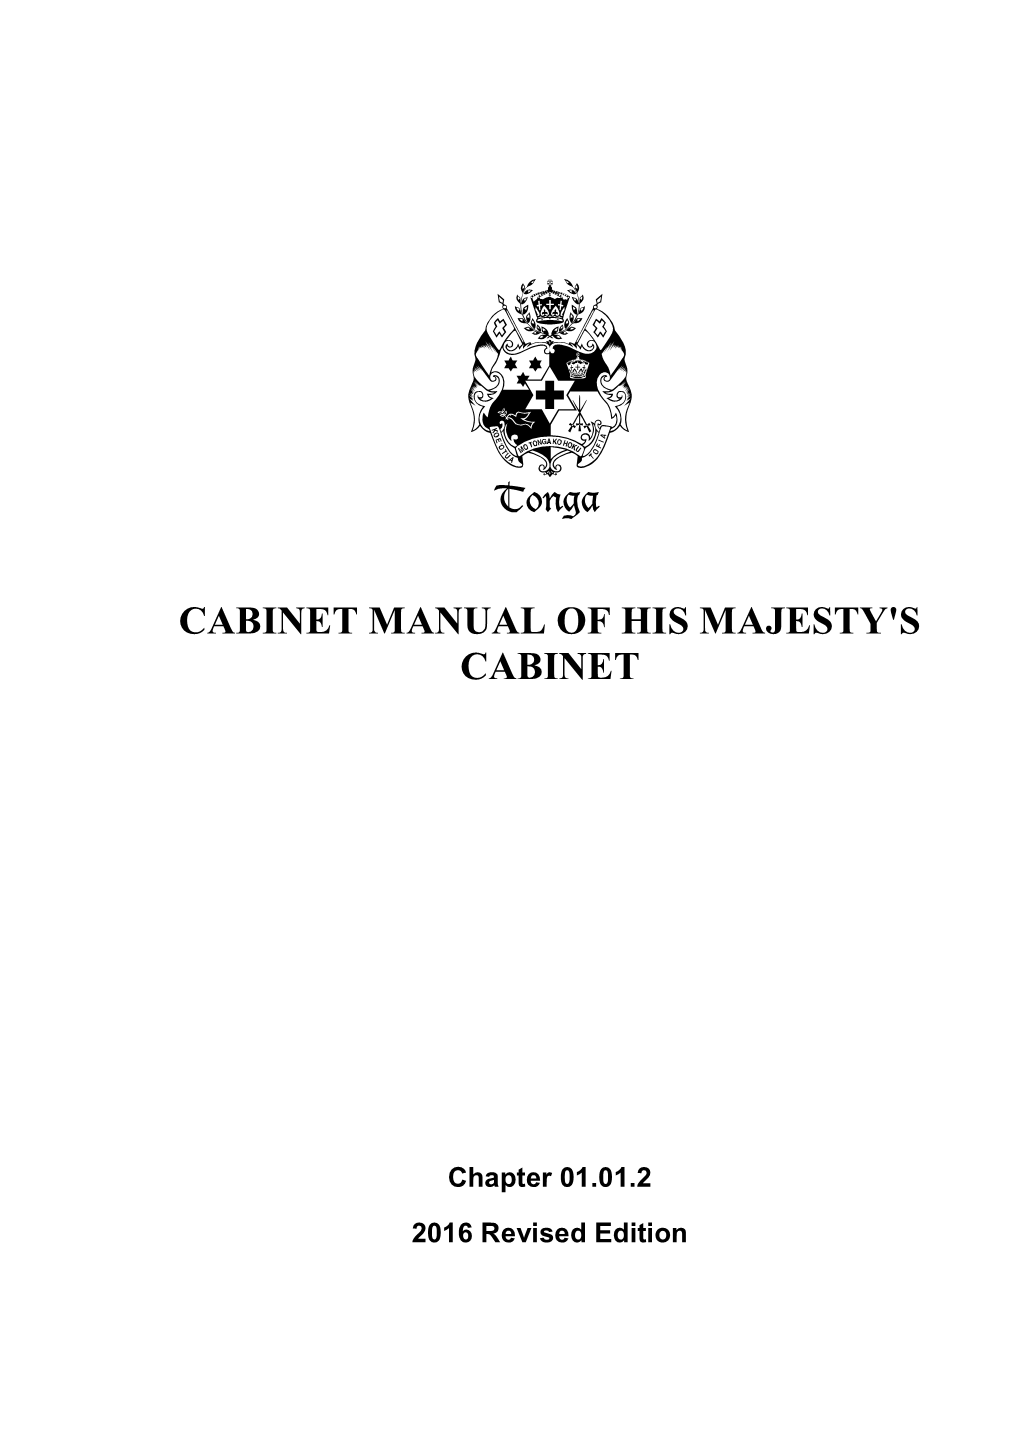 Cabinet Manual of His Majesty's Cabinet